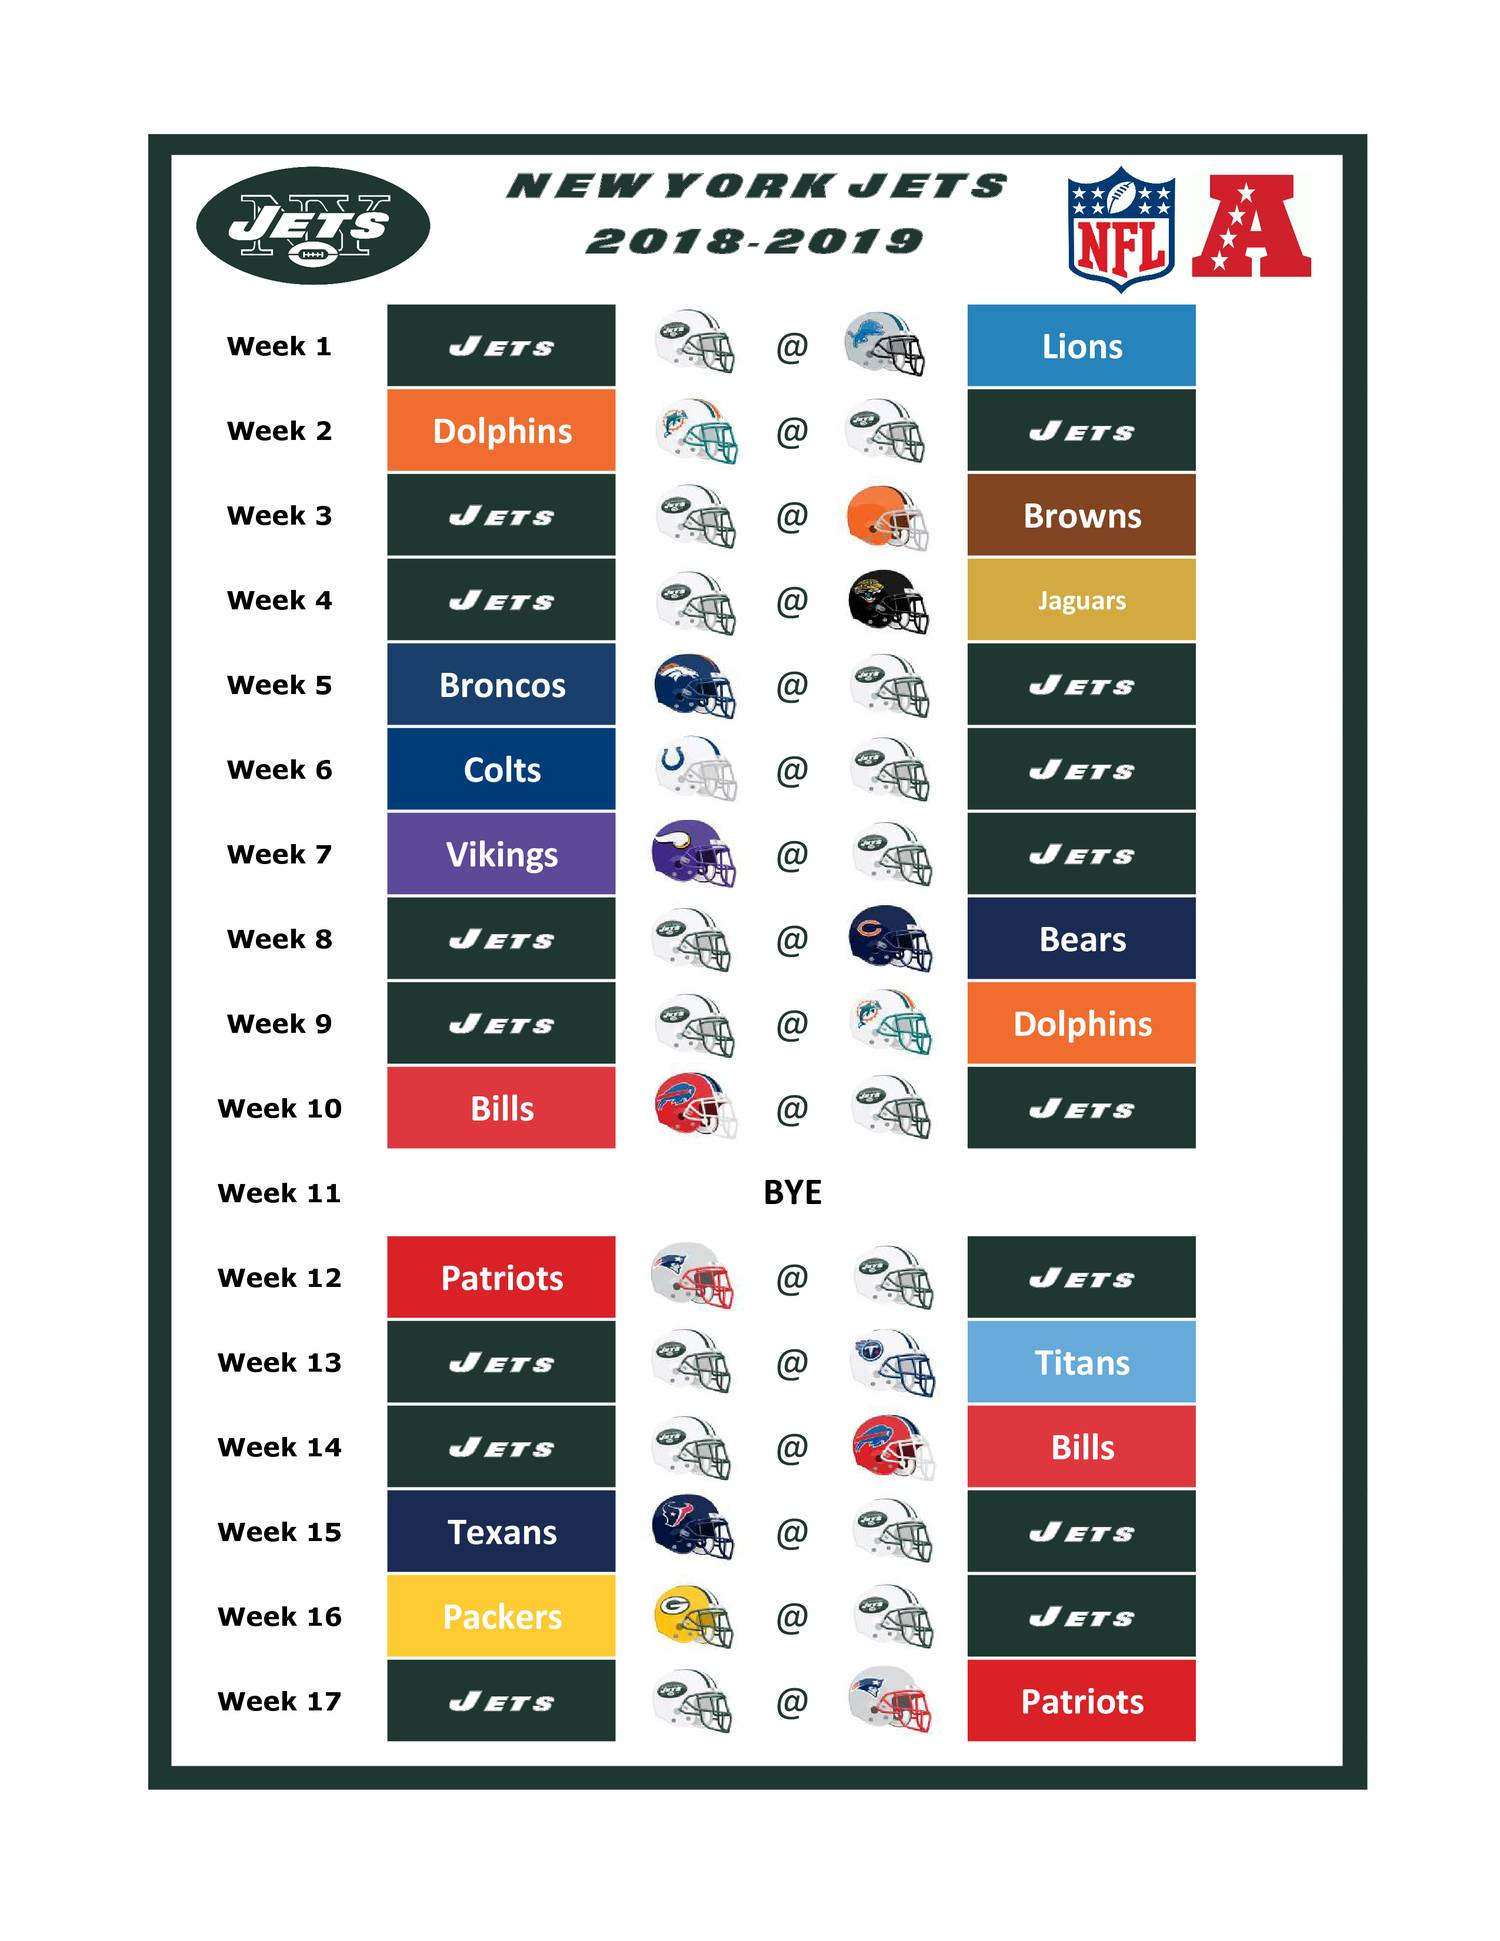 NY JETS Schedule pdf DocDroid